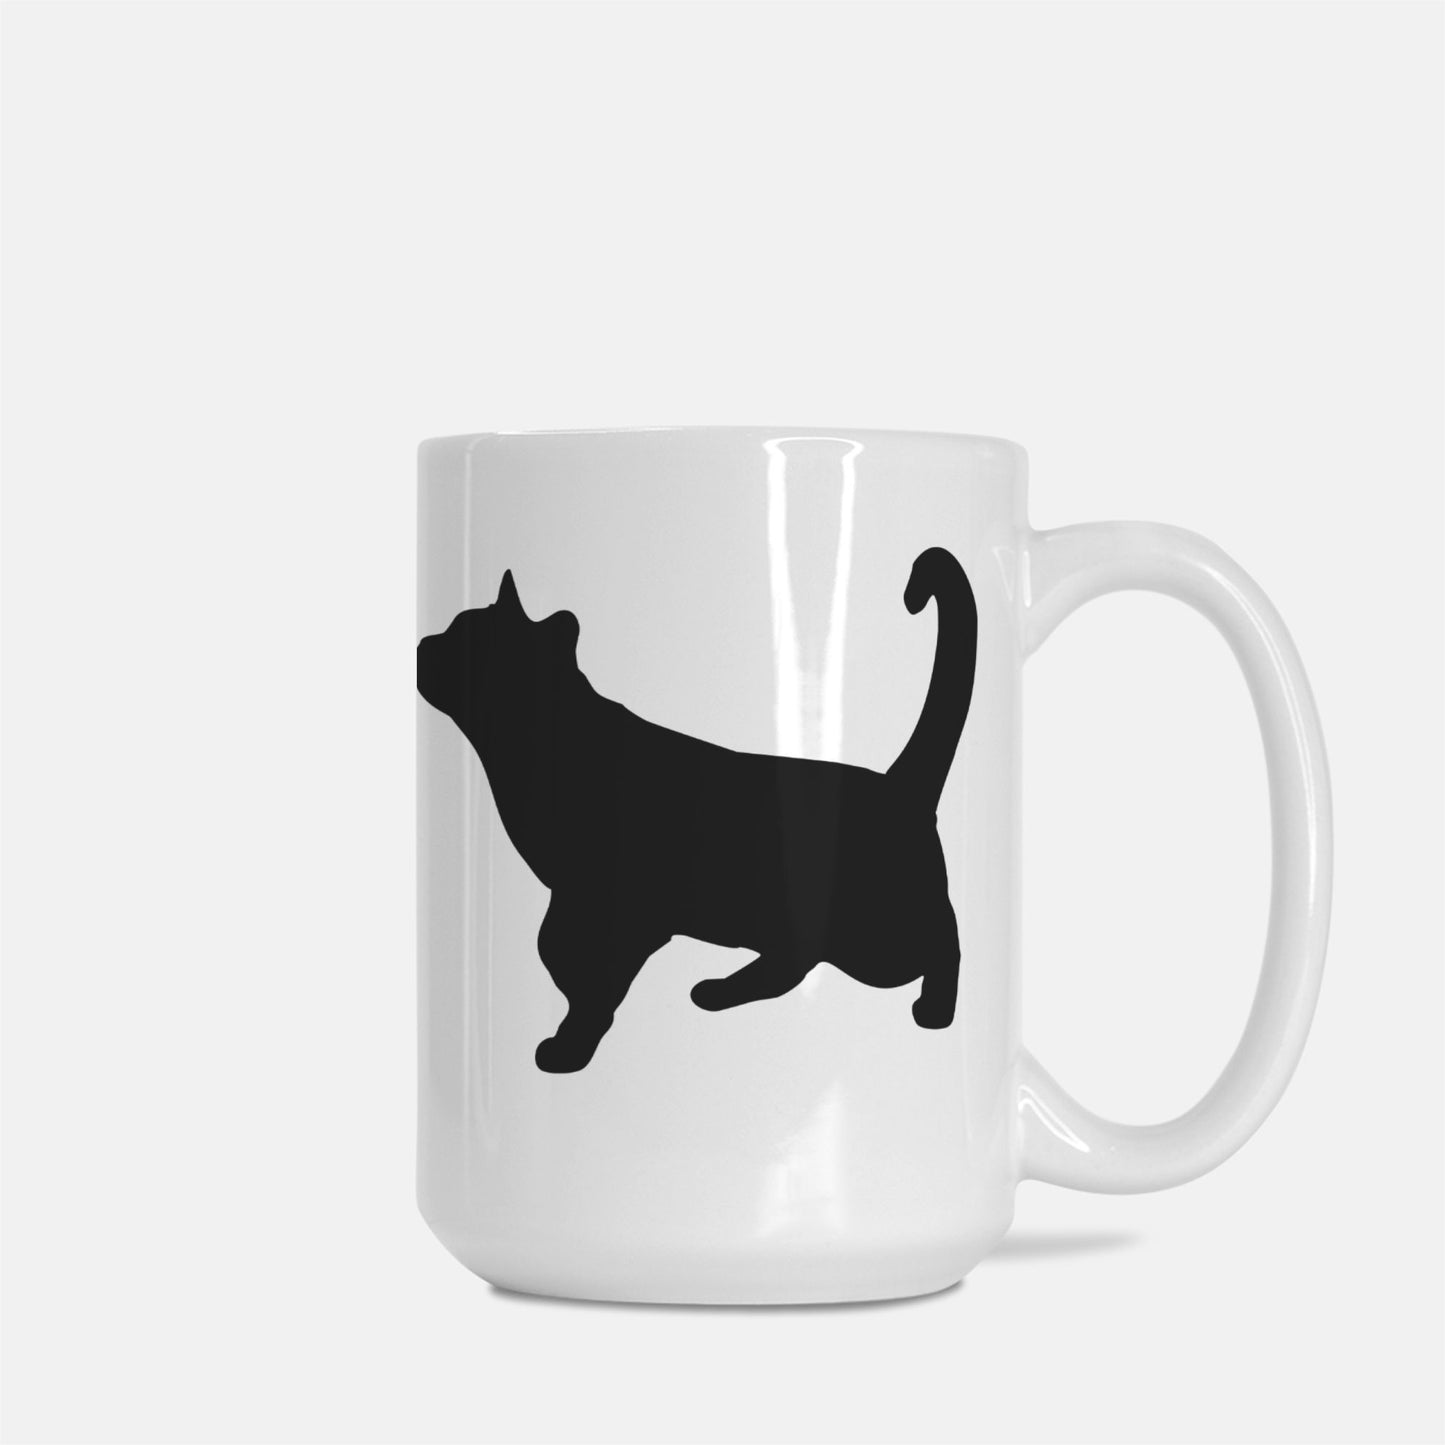 Curious Cat or Relaxed Mug Deluxe 15 oz.Curious Cat or Relaxed Mug